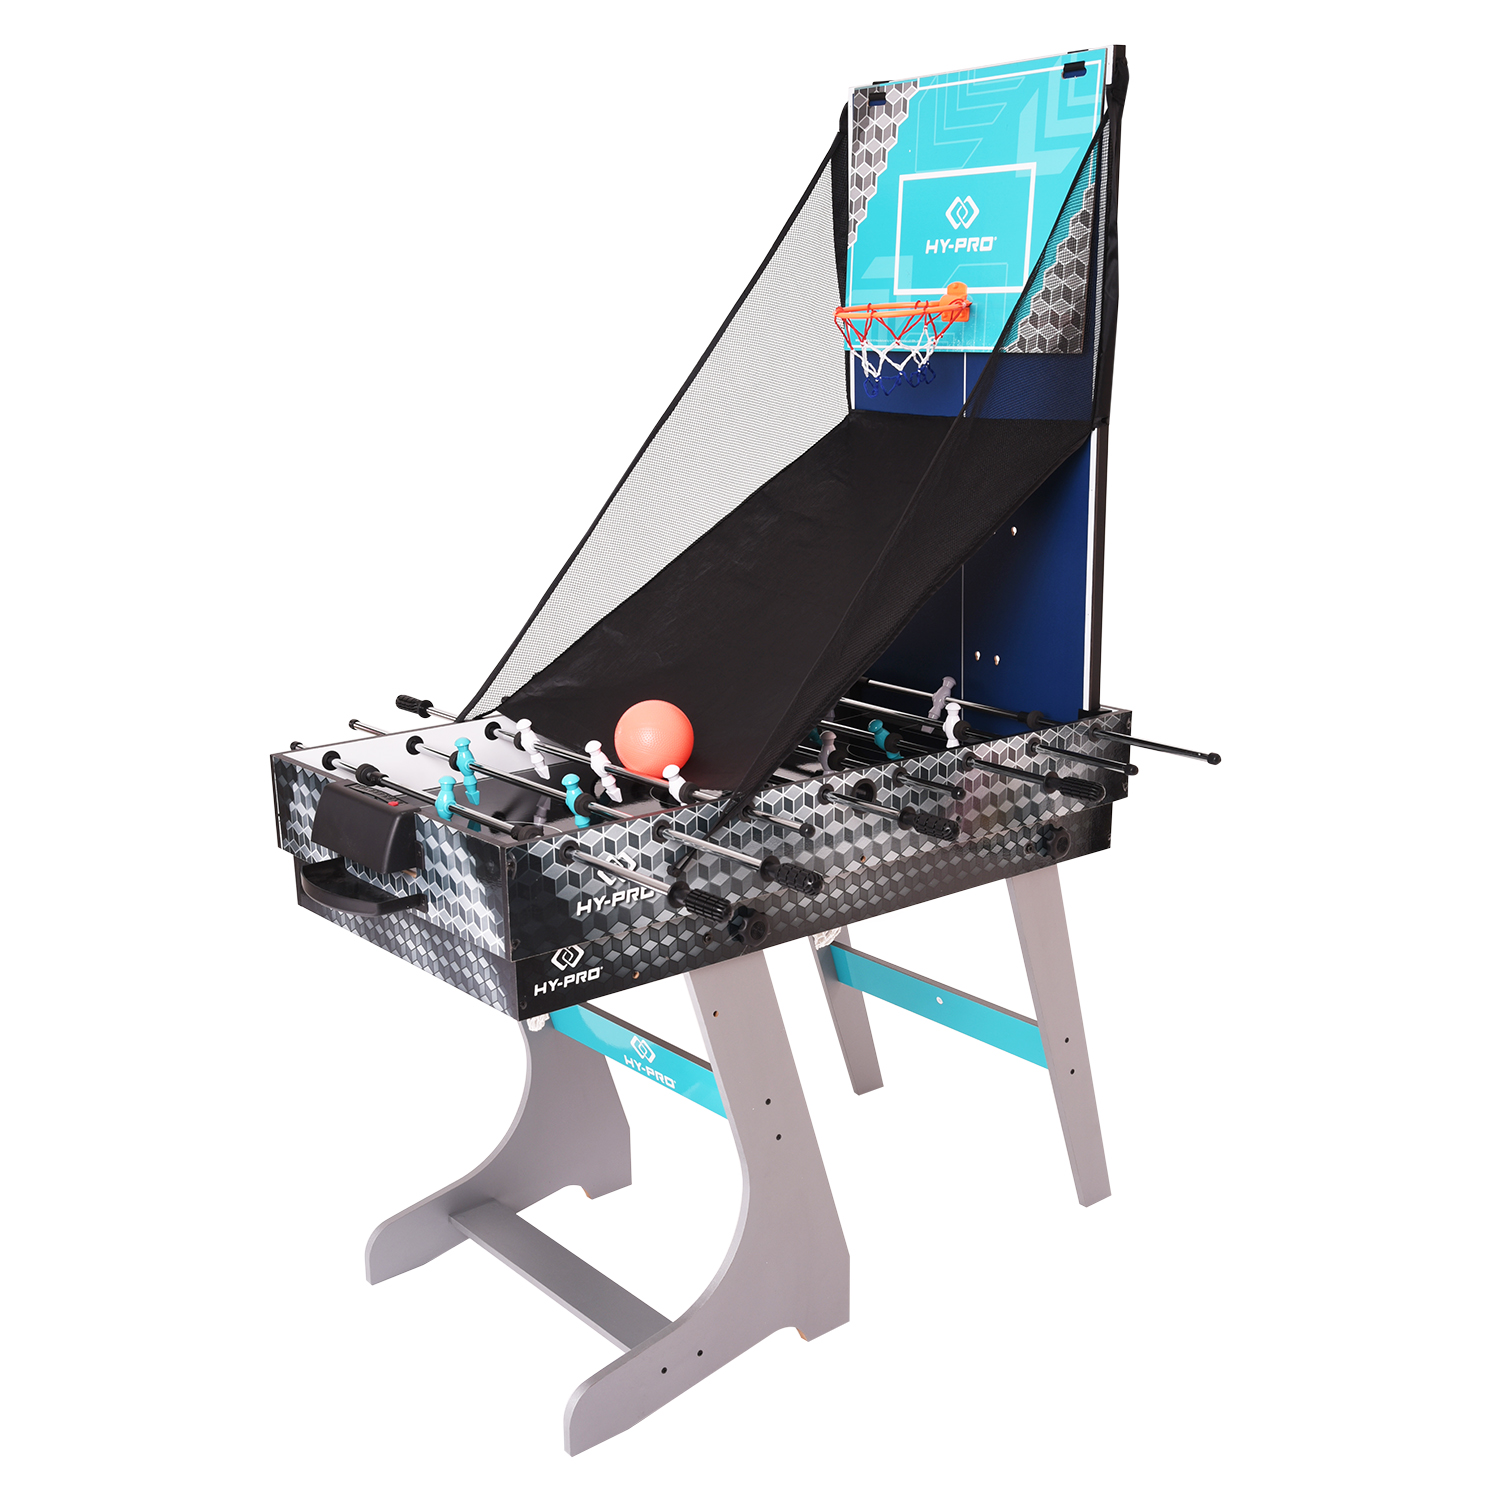 HY-PRO 8-in-1 Folding Combo Game Table (Football, Table Tennis, Pool, Hockey, Archery, Darts, Bean Bag Toss, Basketball) - image 4 of 11